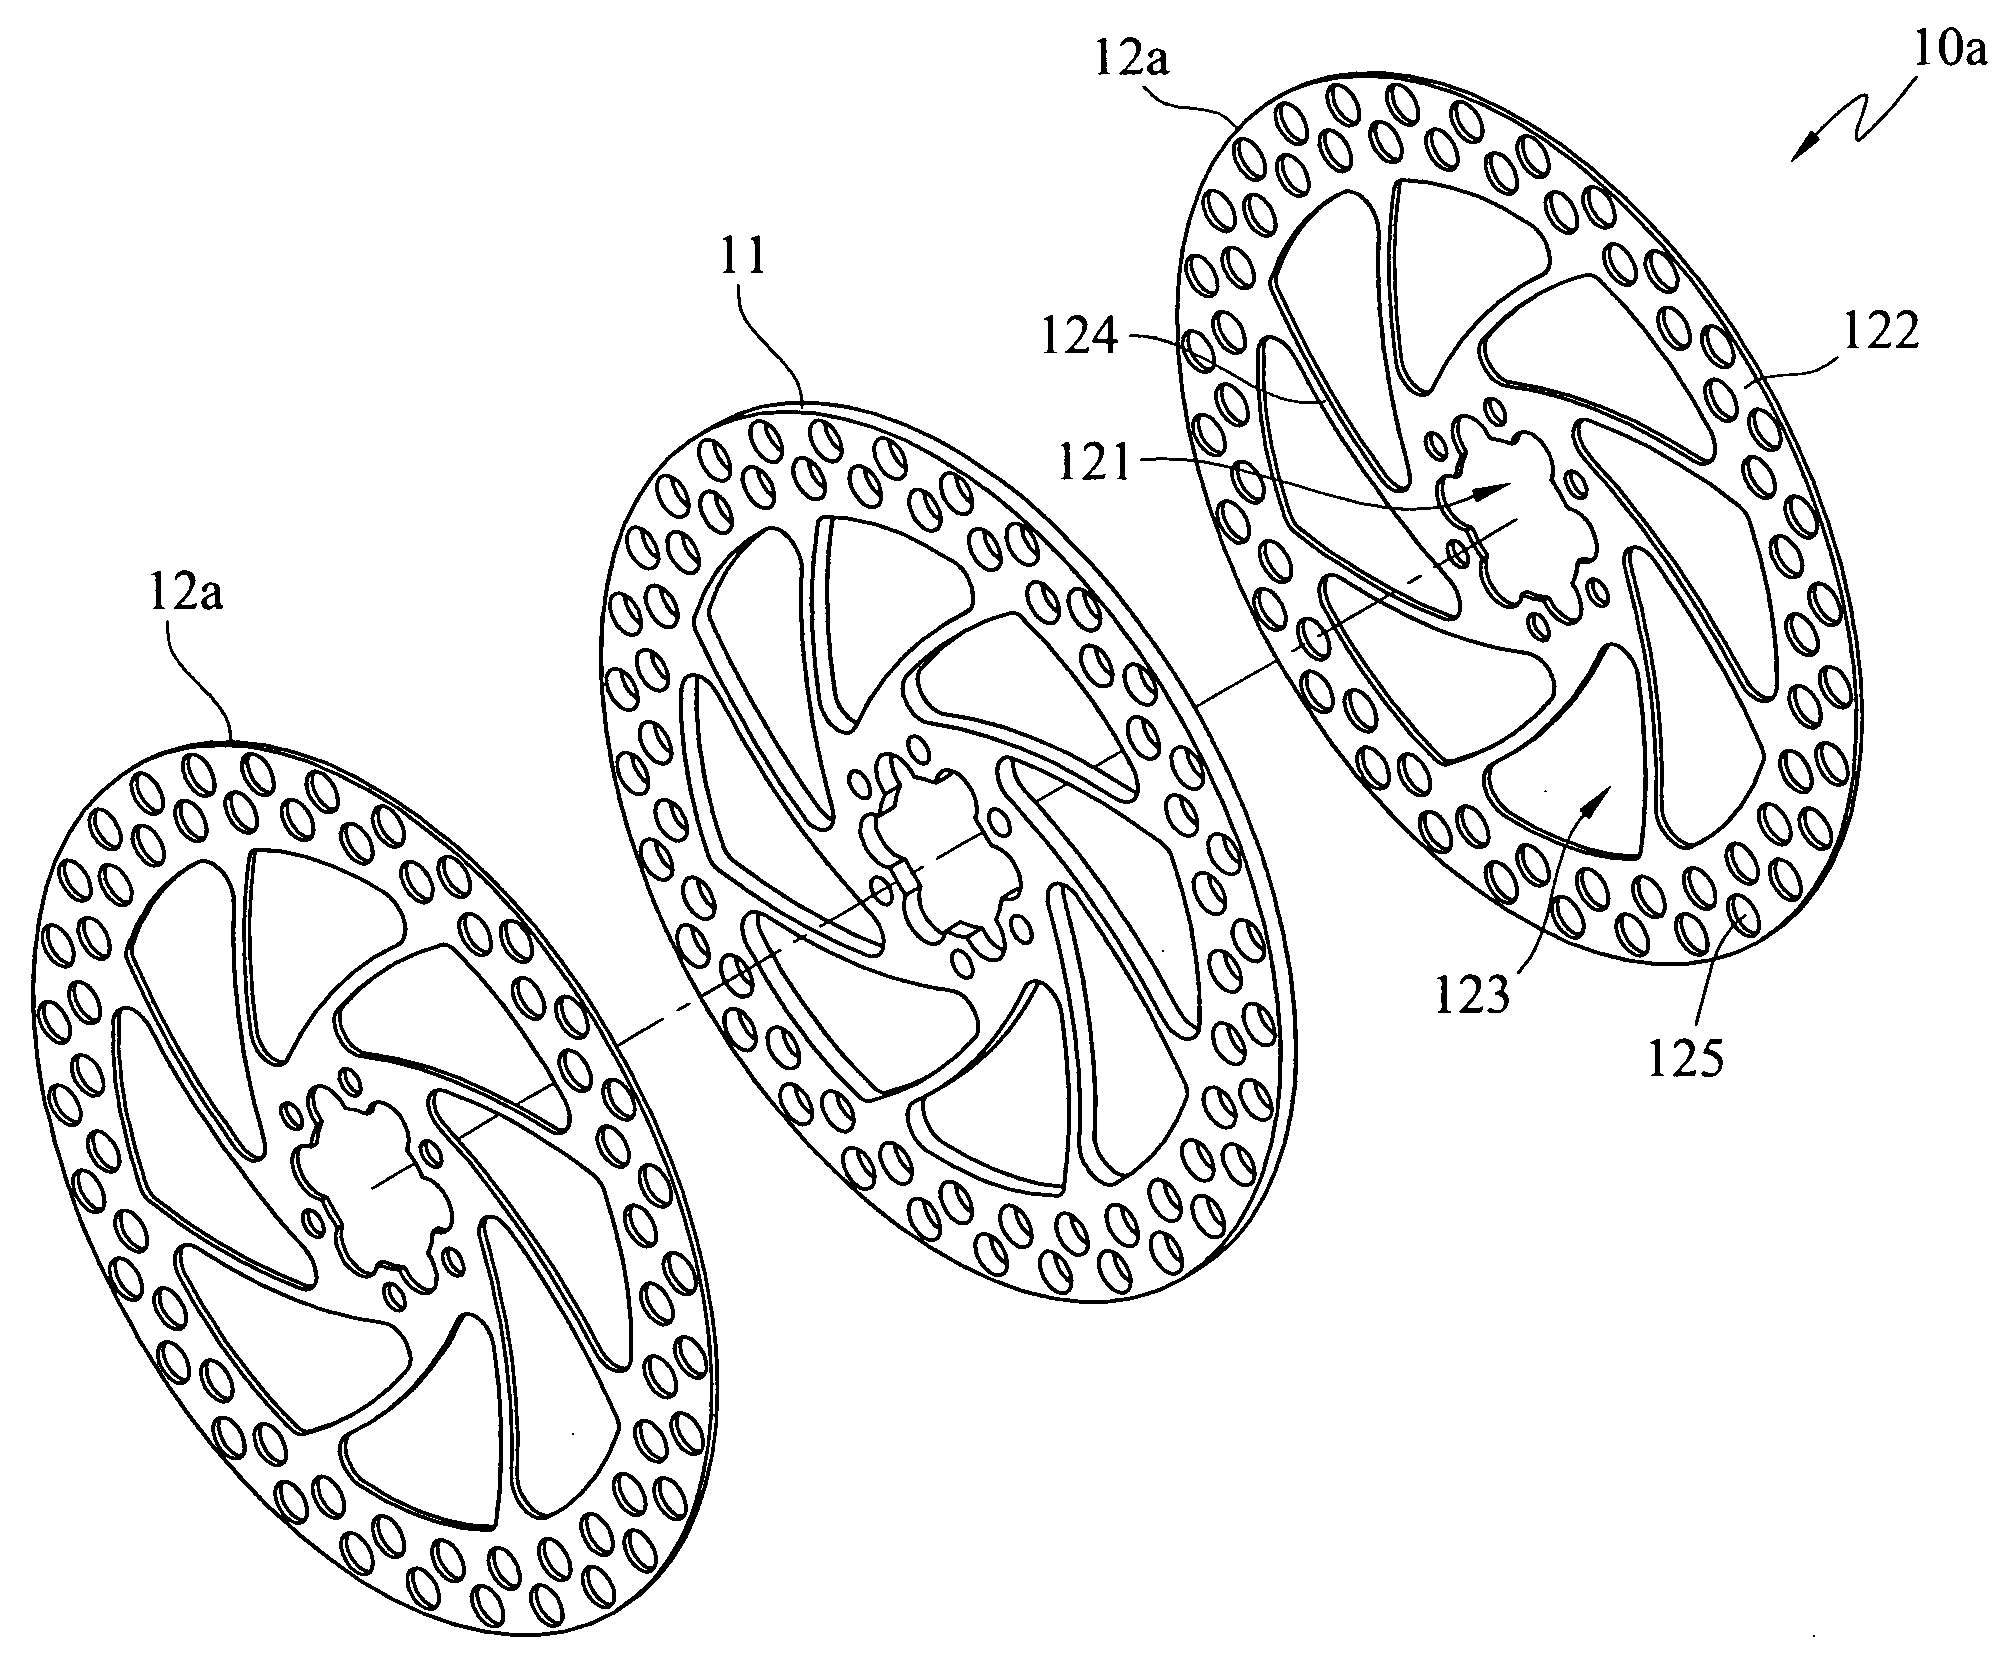 Brake disc structure with composite materials